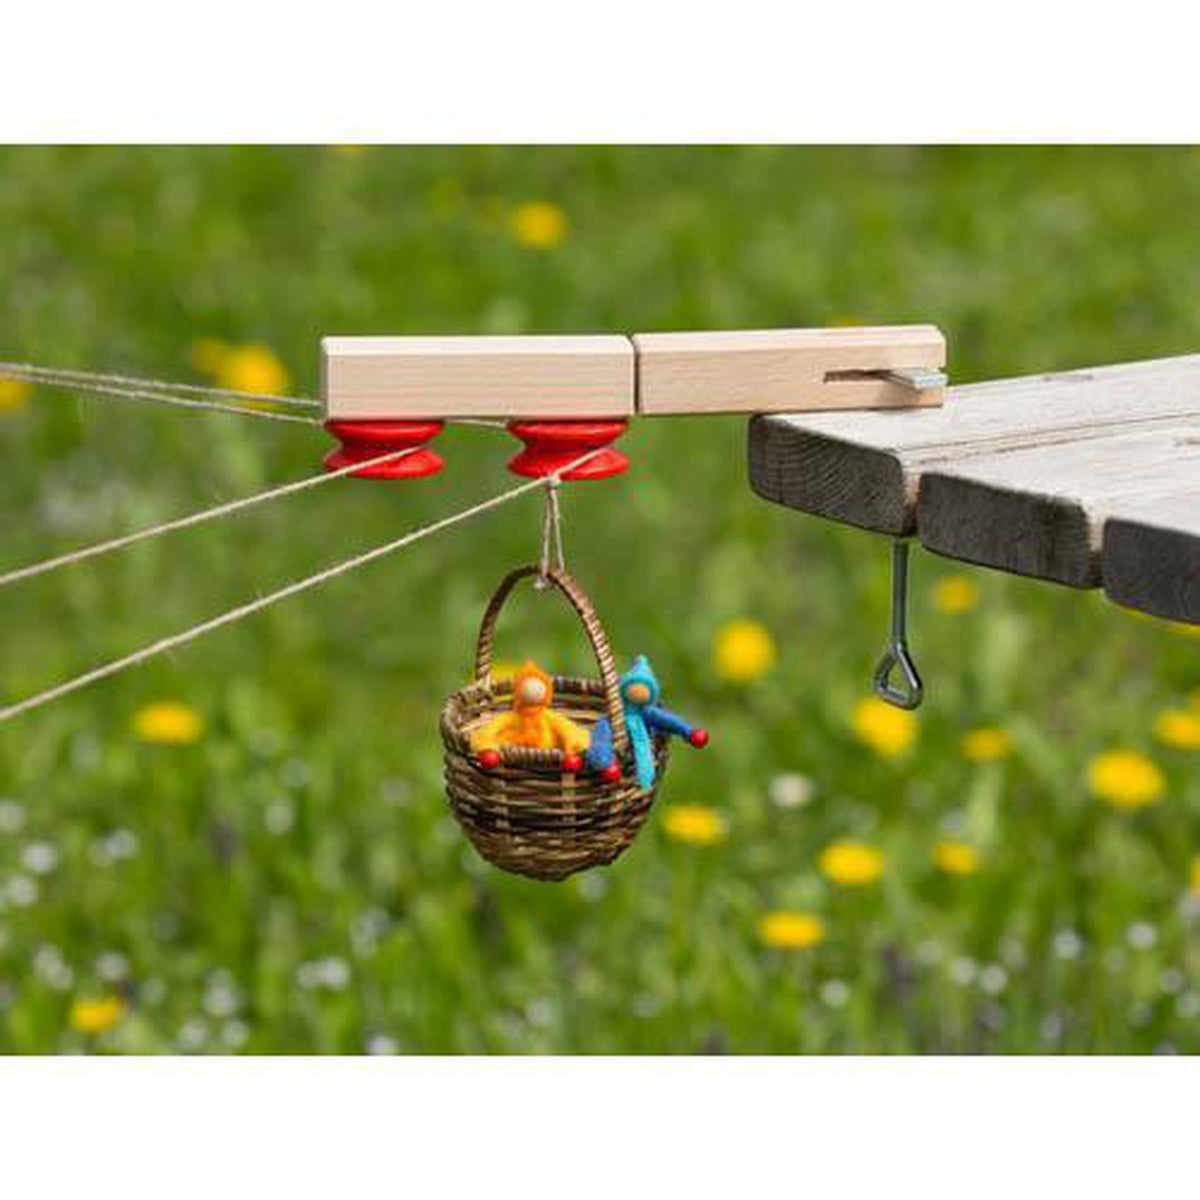 Kraul turning tower for basket cable car-science & nature-Kraul-Dilly Dally Kids